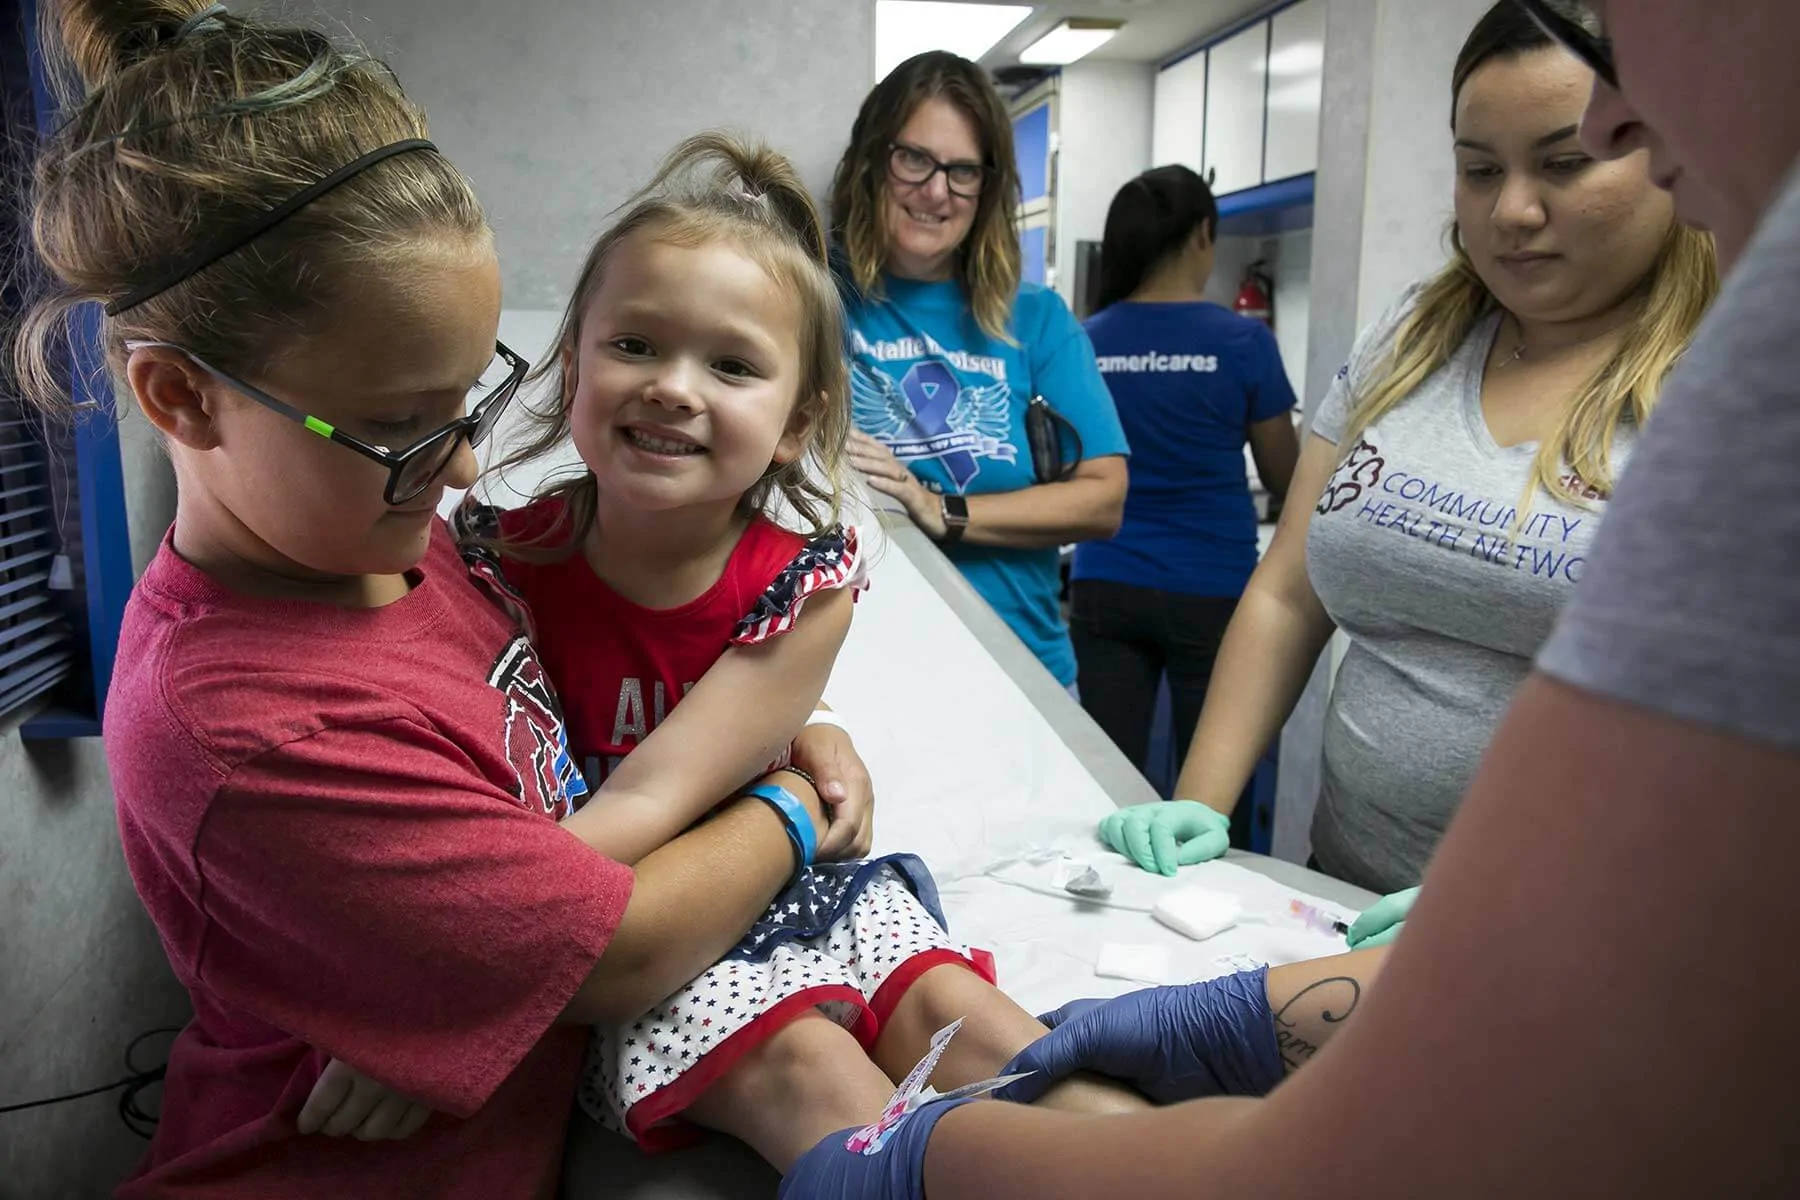 A little girl gets treatment at an Americares clinic while her older sister comforts her.